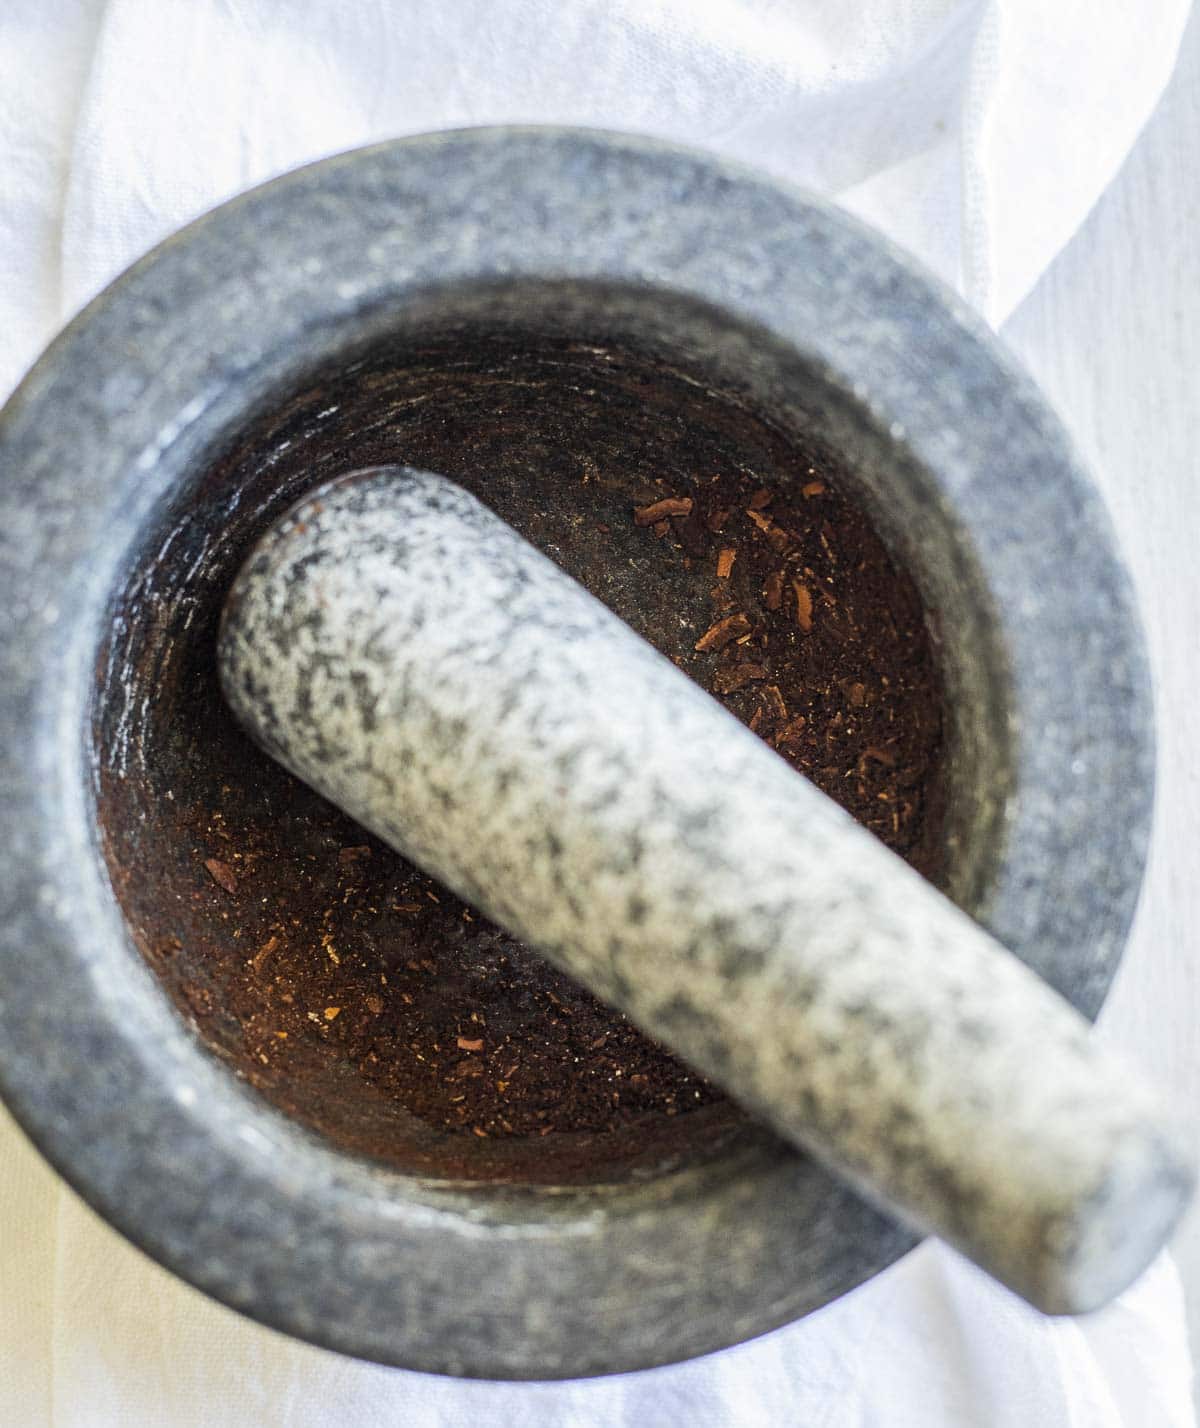 Toasted spices being ground together using a pestle and mortar.